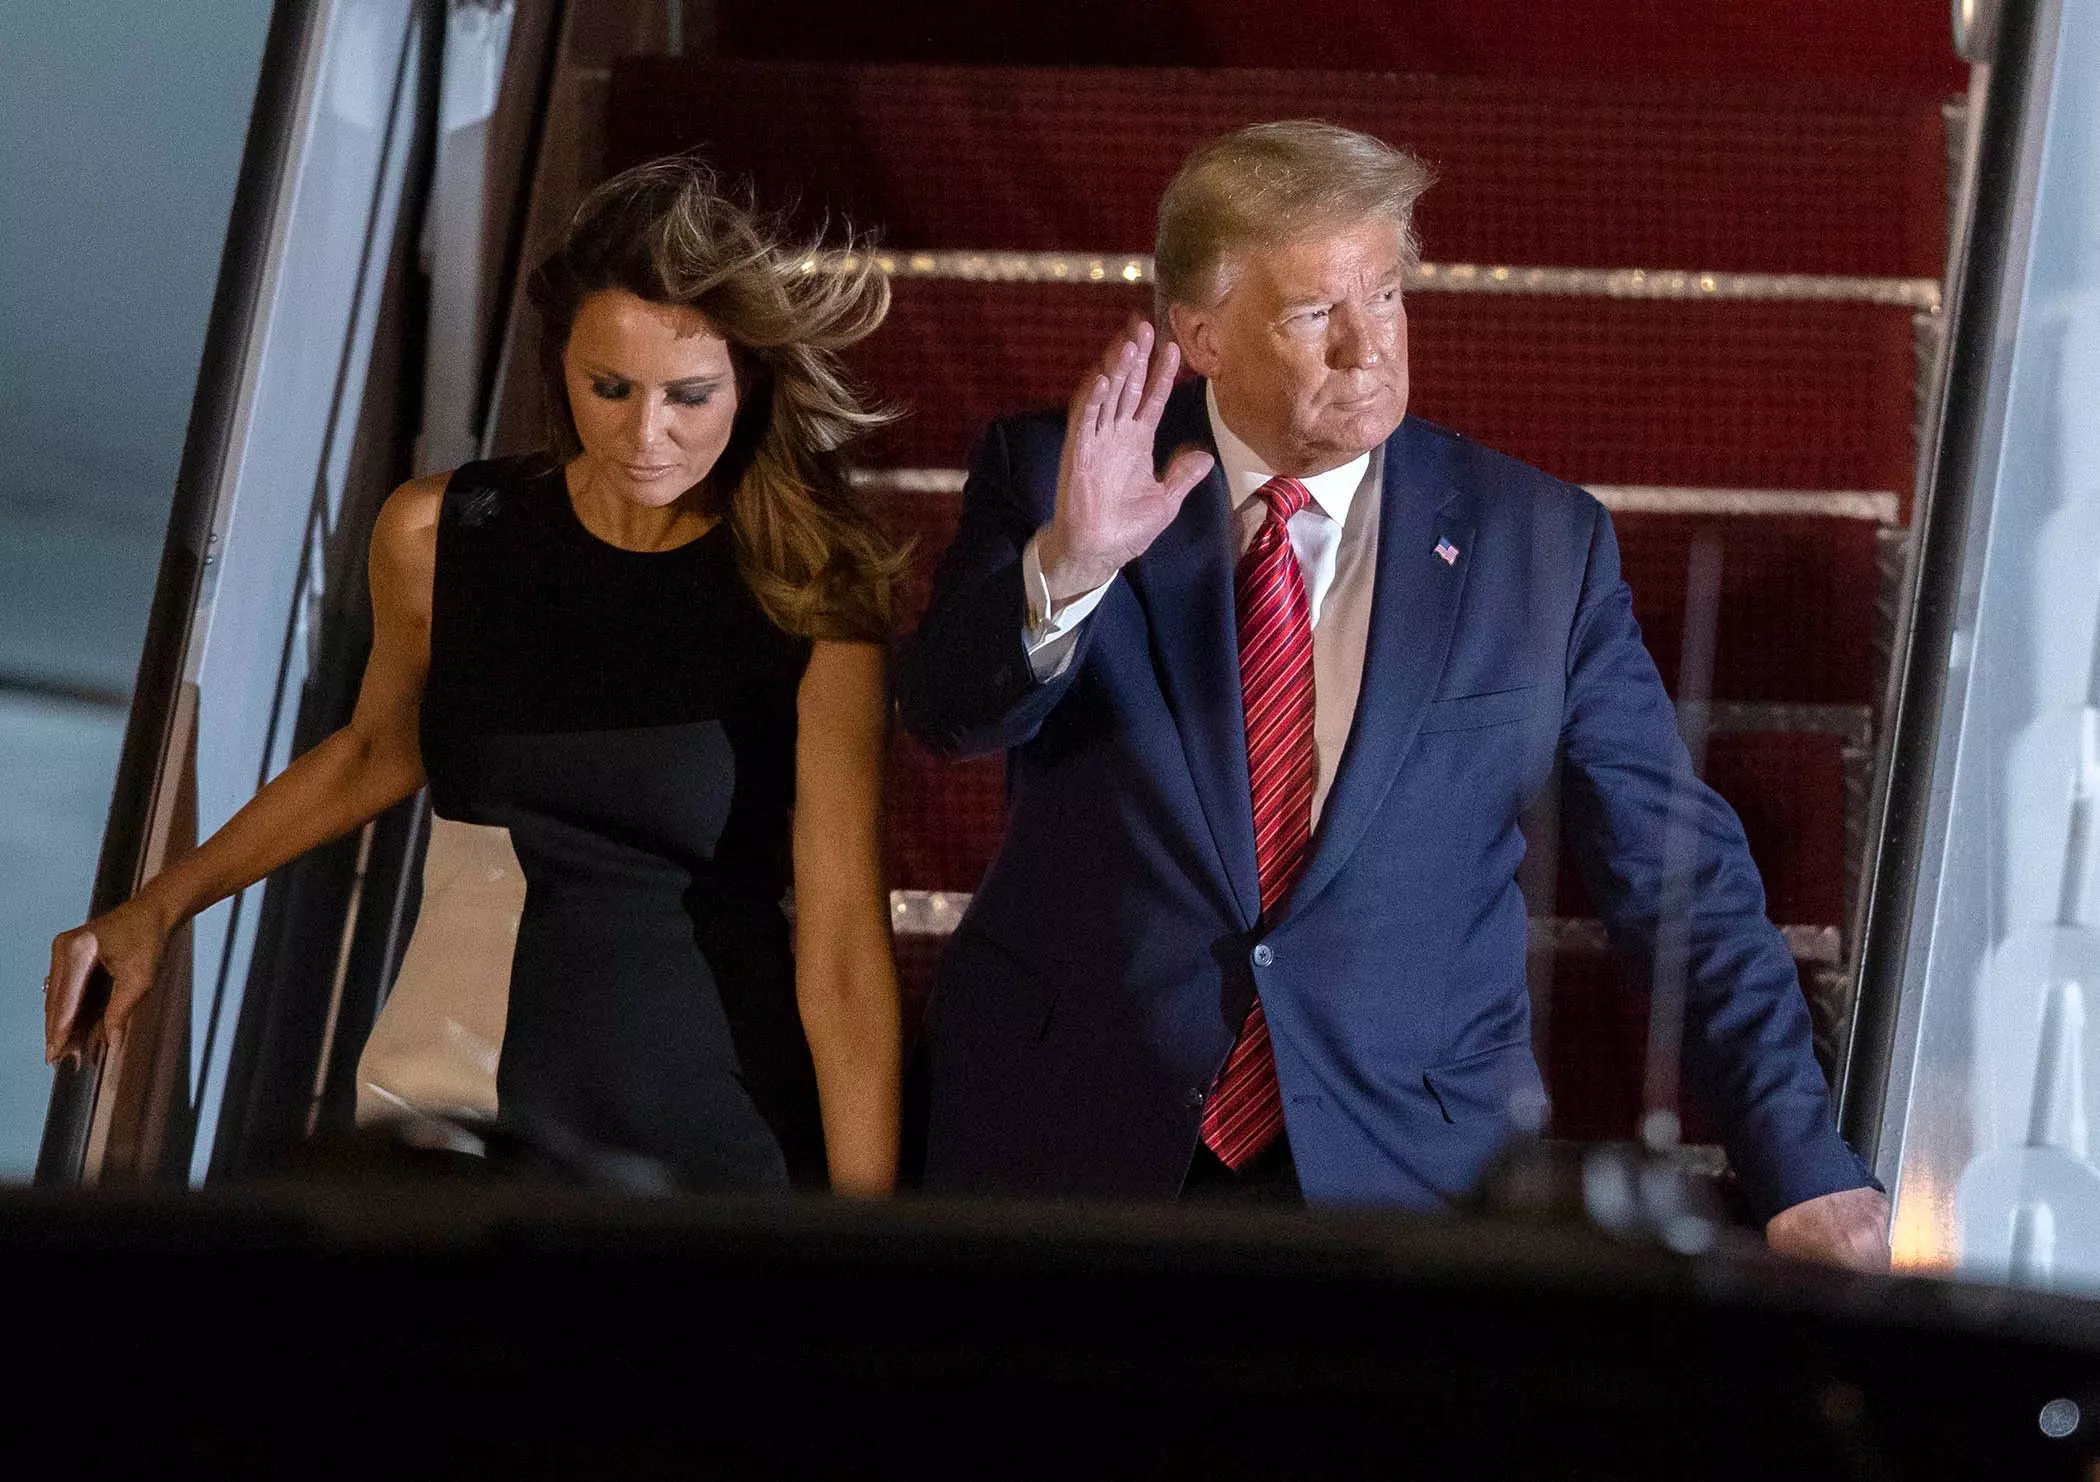 President Donald Trump and first lady Melania Trump arrive in February at Palm Beach International Airport, about four miles from Mar-a-Lago, the president’s winter White House.